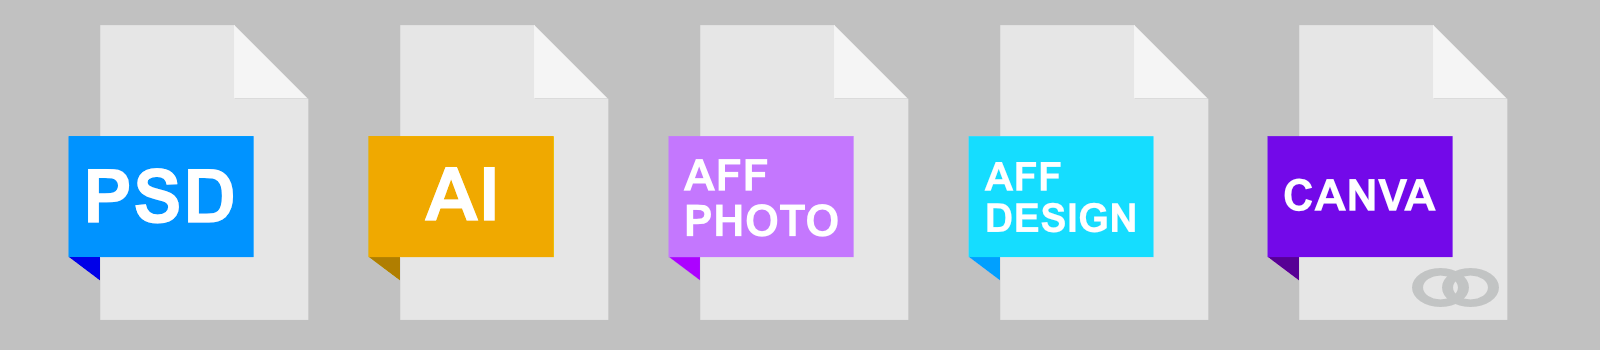 Illustration: layered source file formats used to sell graphics and digital art